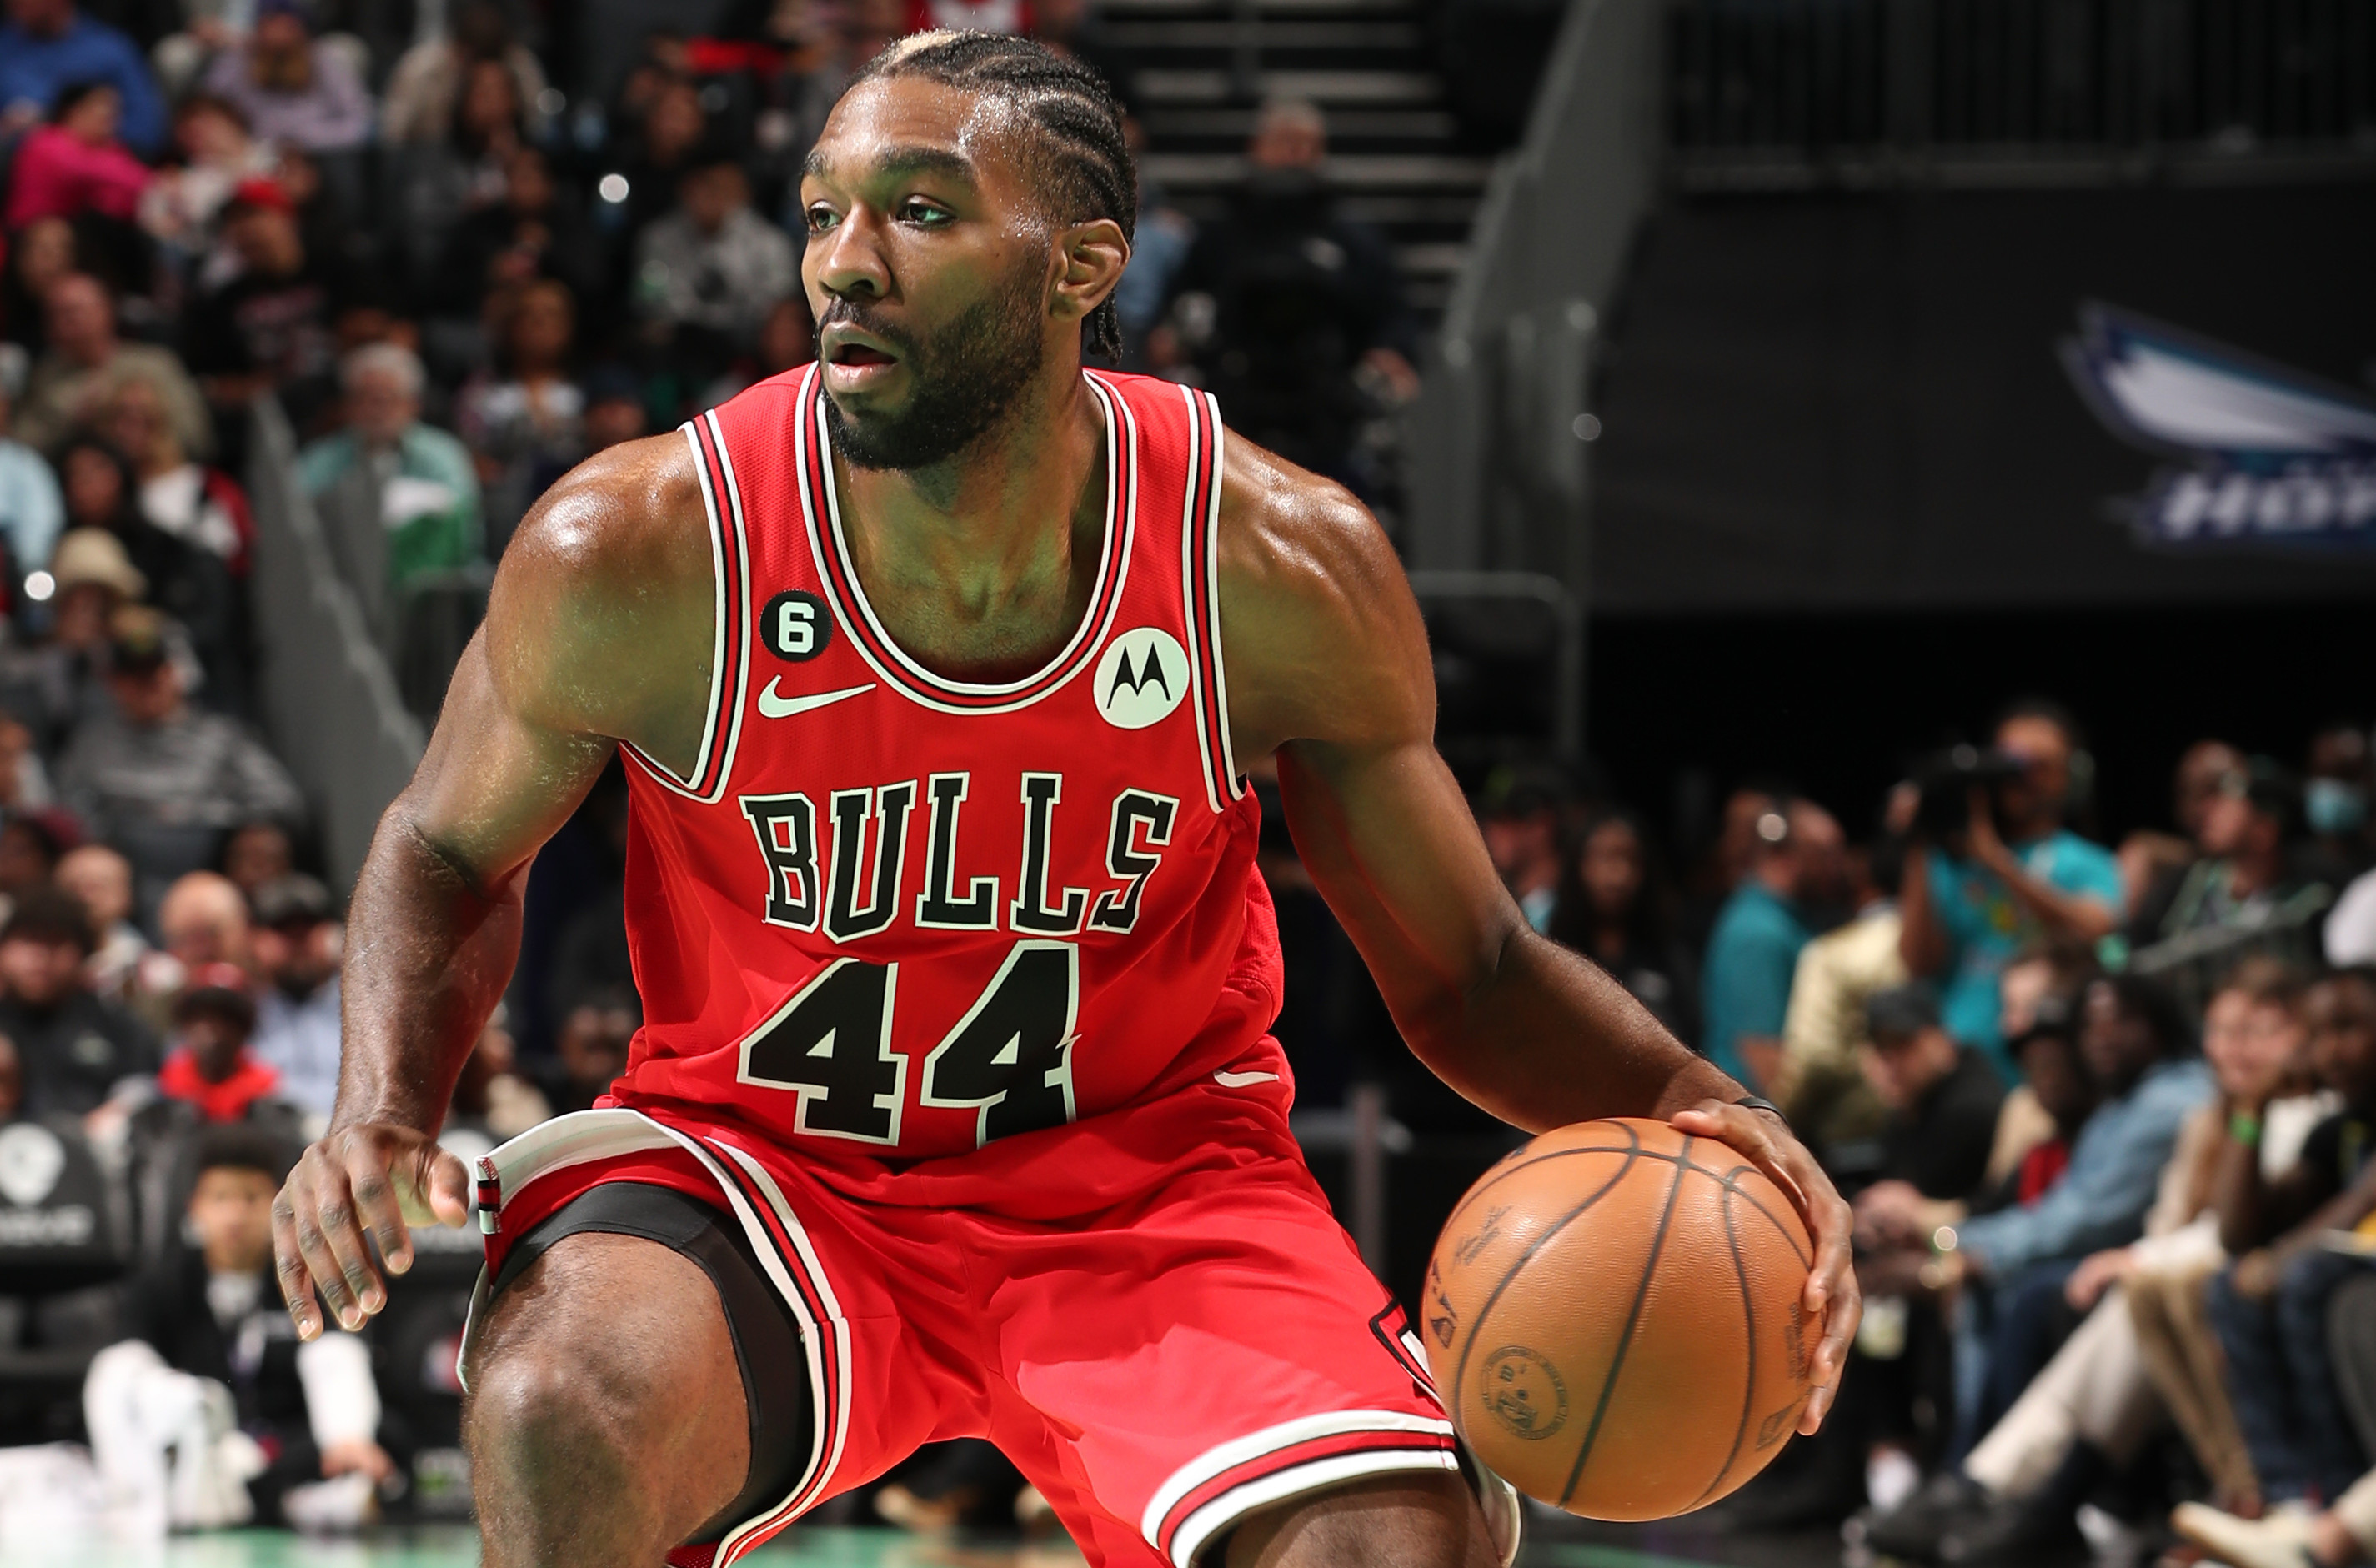 Bulls assign Patrick Williams to Windy City as he nears a return